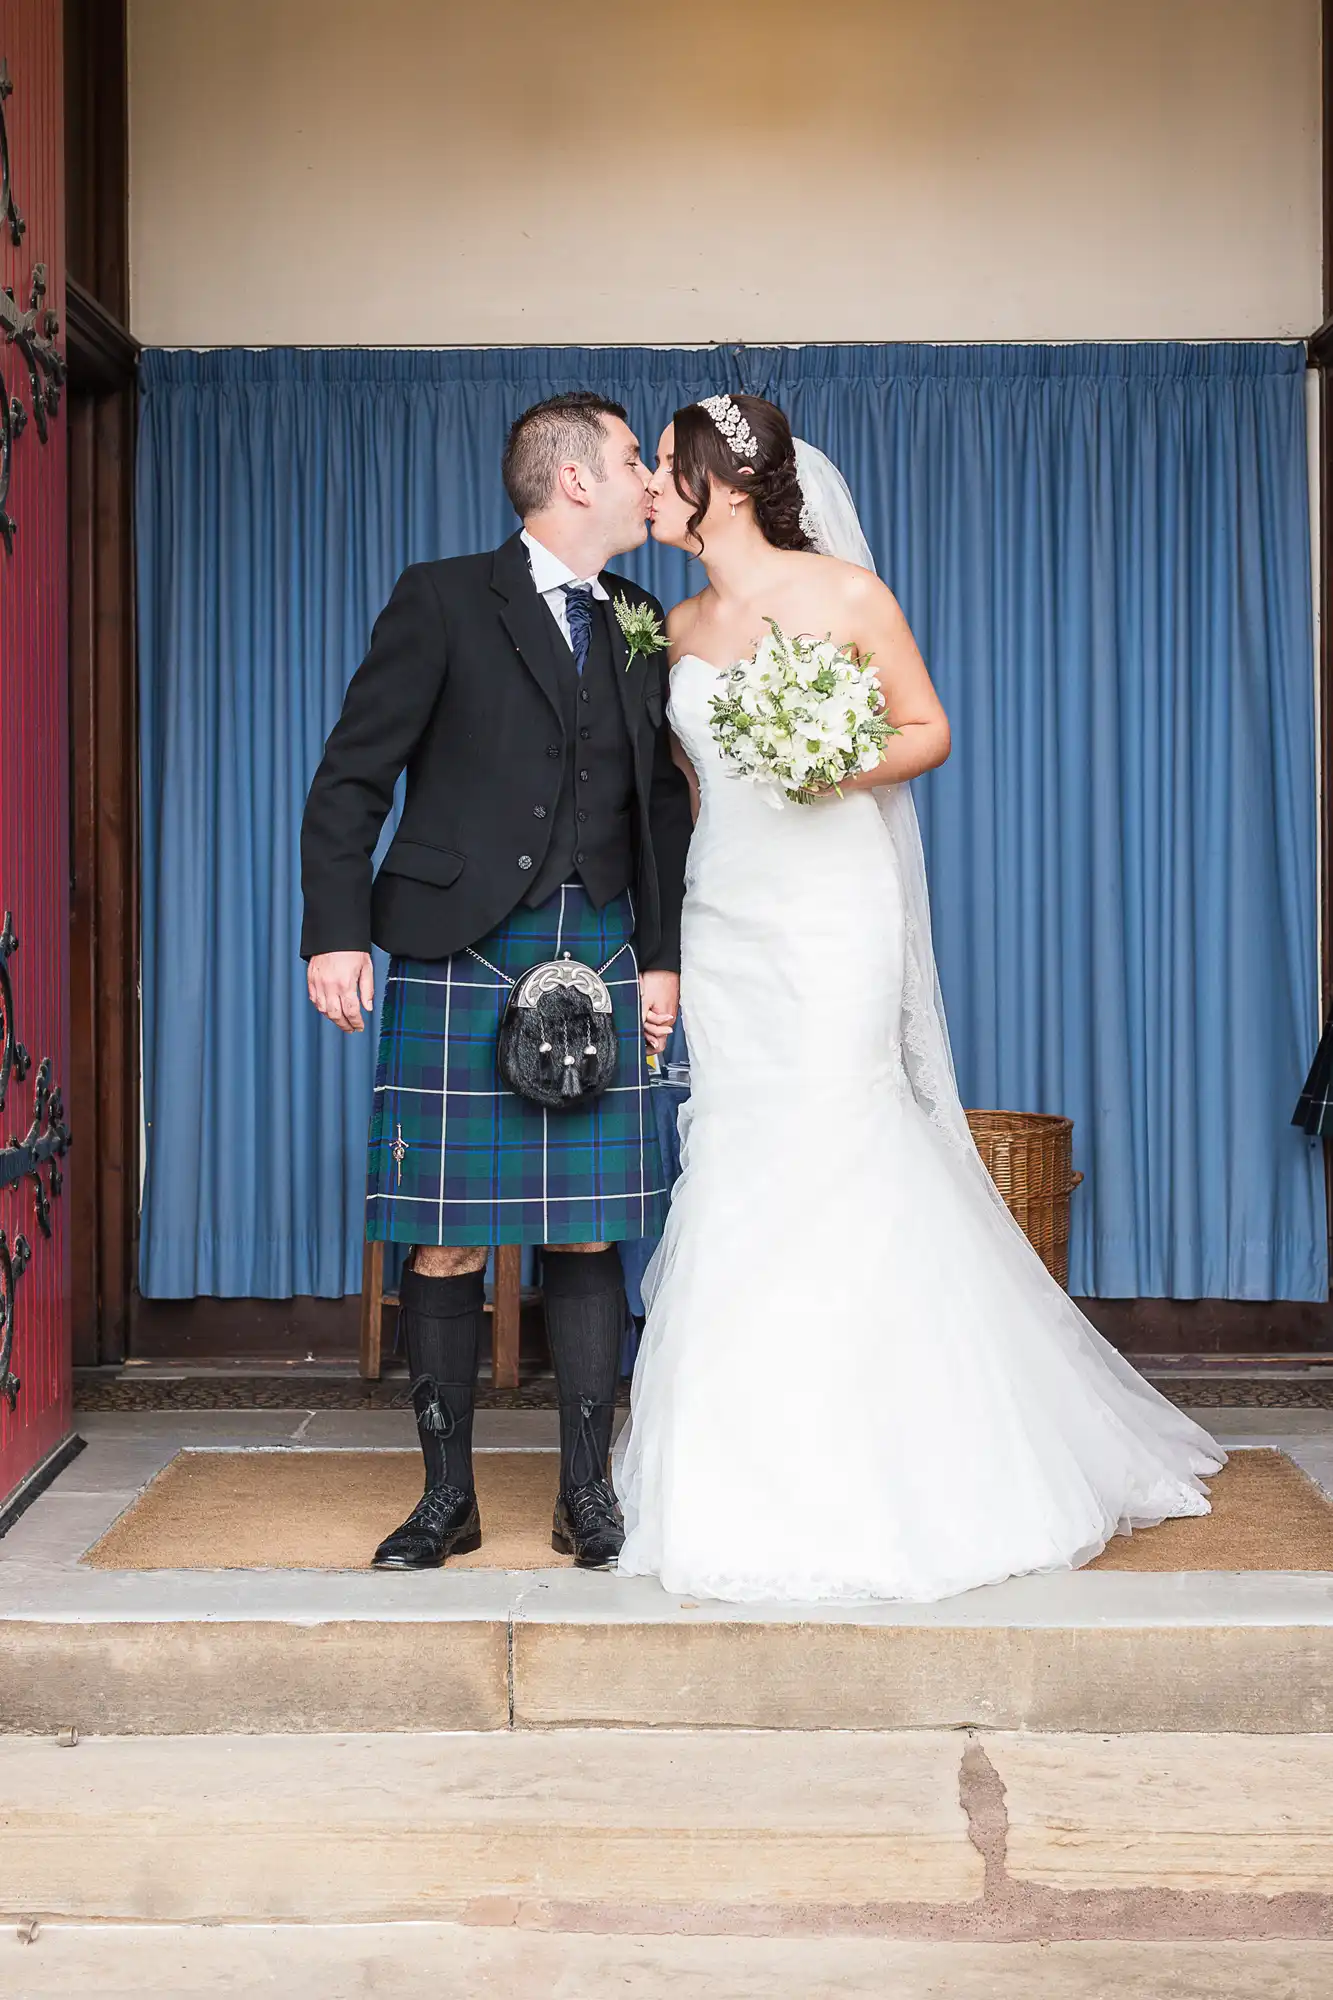 A bride in a white dress and a groom in a kilt and sporran share a kiss at a doorway with blue curtains.